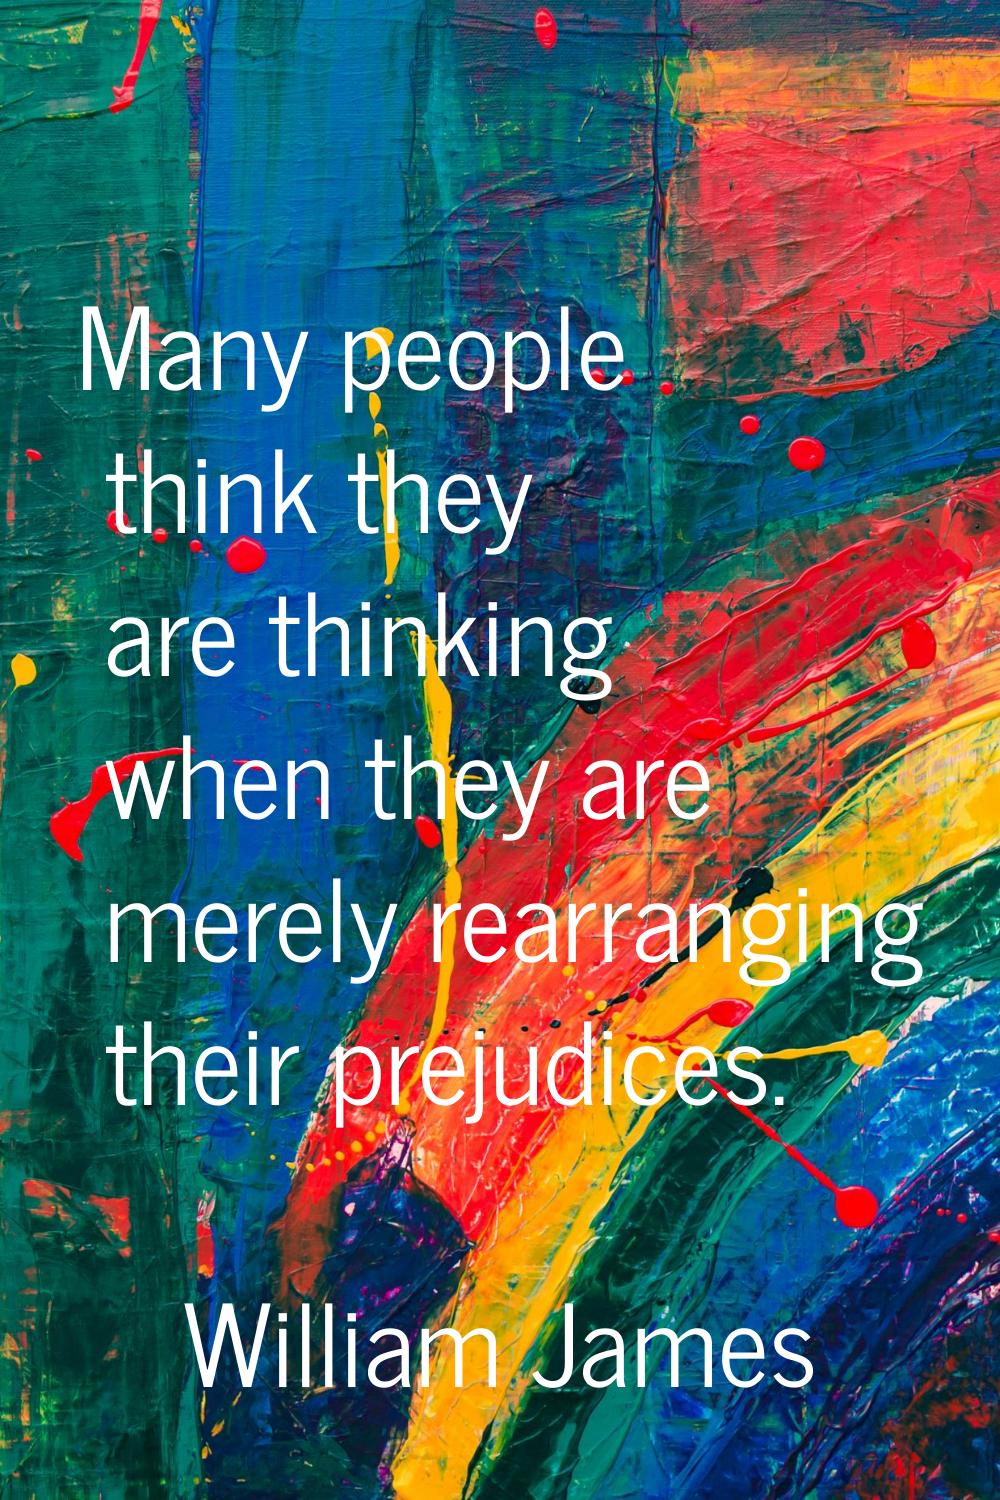 Many people think they are thinking when they are merely rearranging their prejudices.